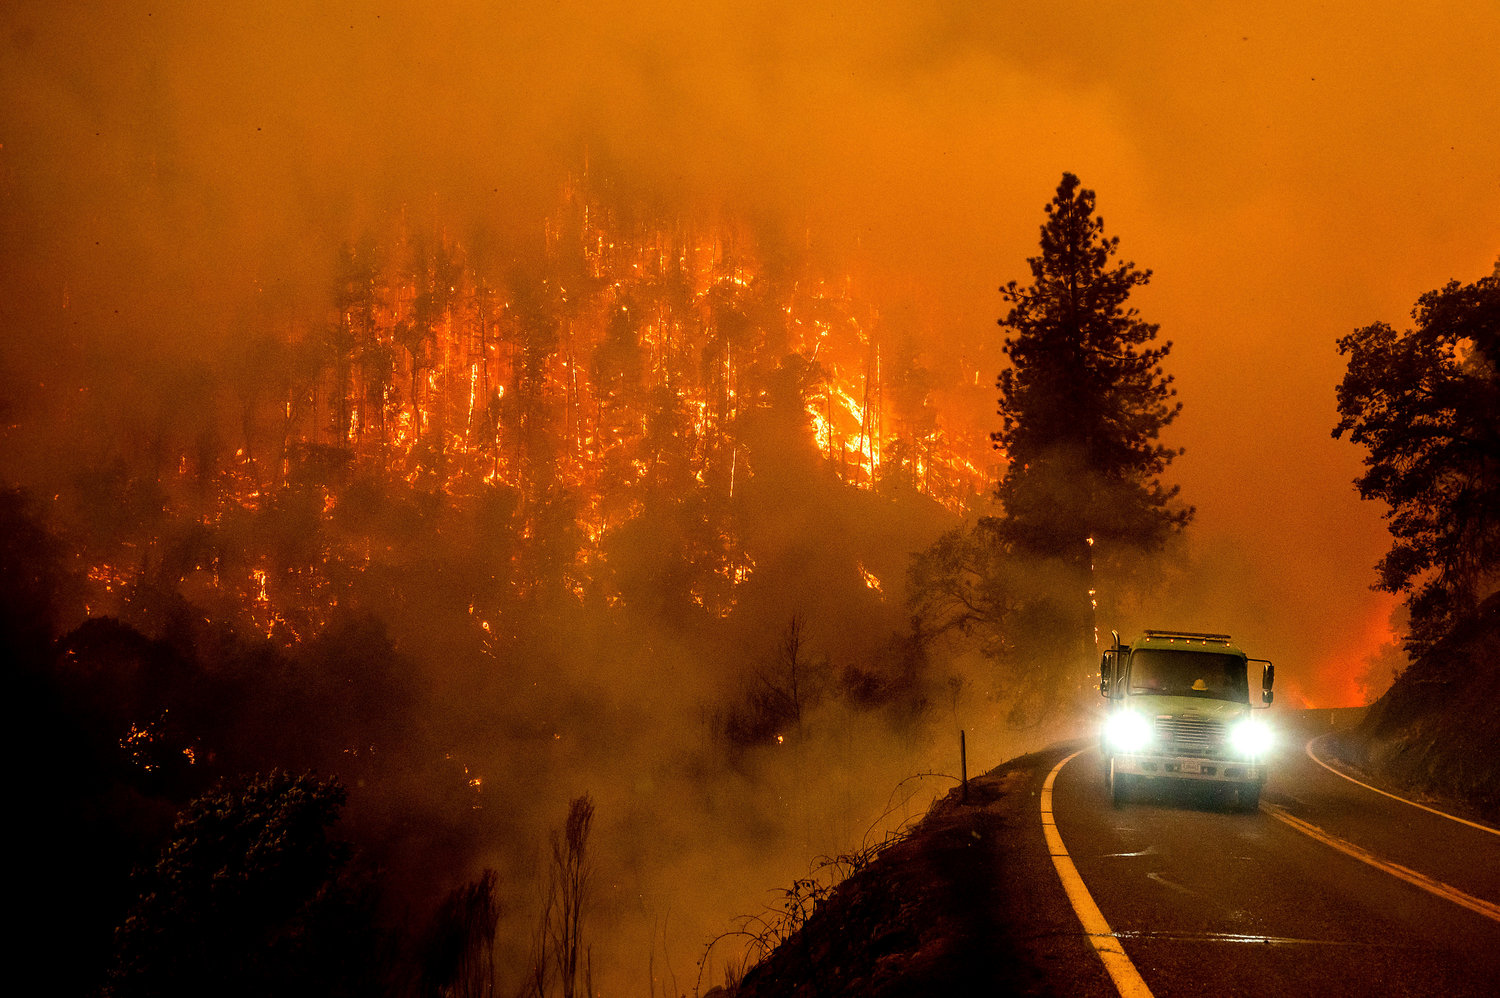 FILE - A firetruck drives along California Highway 96 as the McKinney Fire burns in Klamath National Forest, Calif., on July 30, 2022. 90% of counties in the United States experienced a weather-related disaster between 2011-2021, according to a report published on Wednesday, Nov. 16, 2022. Over 300 million people ‚Äî 93% of the country‚Äôs population ‚Äî live in those counties. (AP Photo/Noah Berger, File)